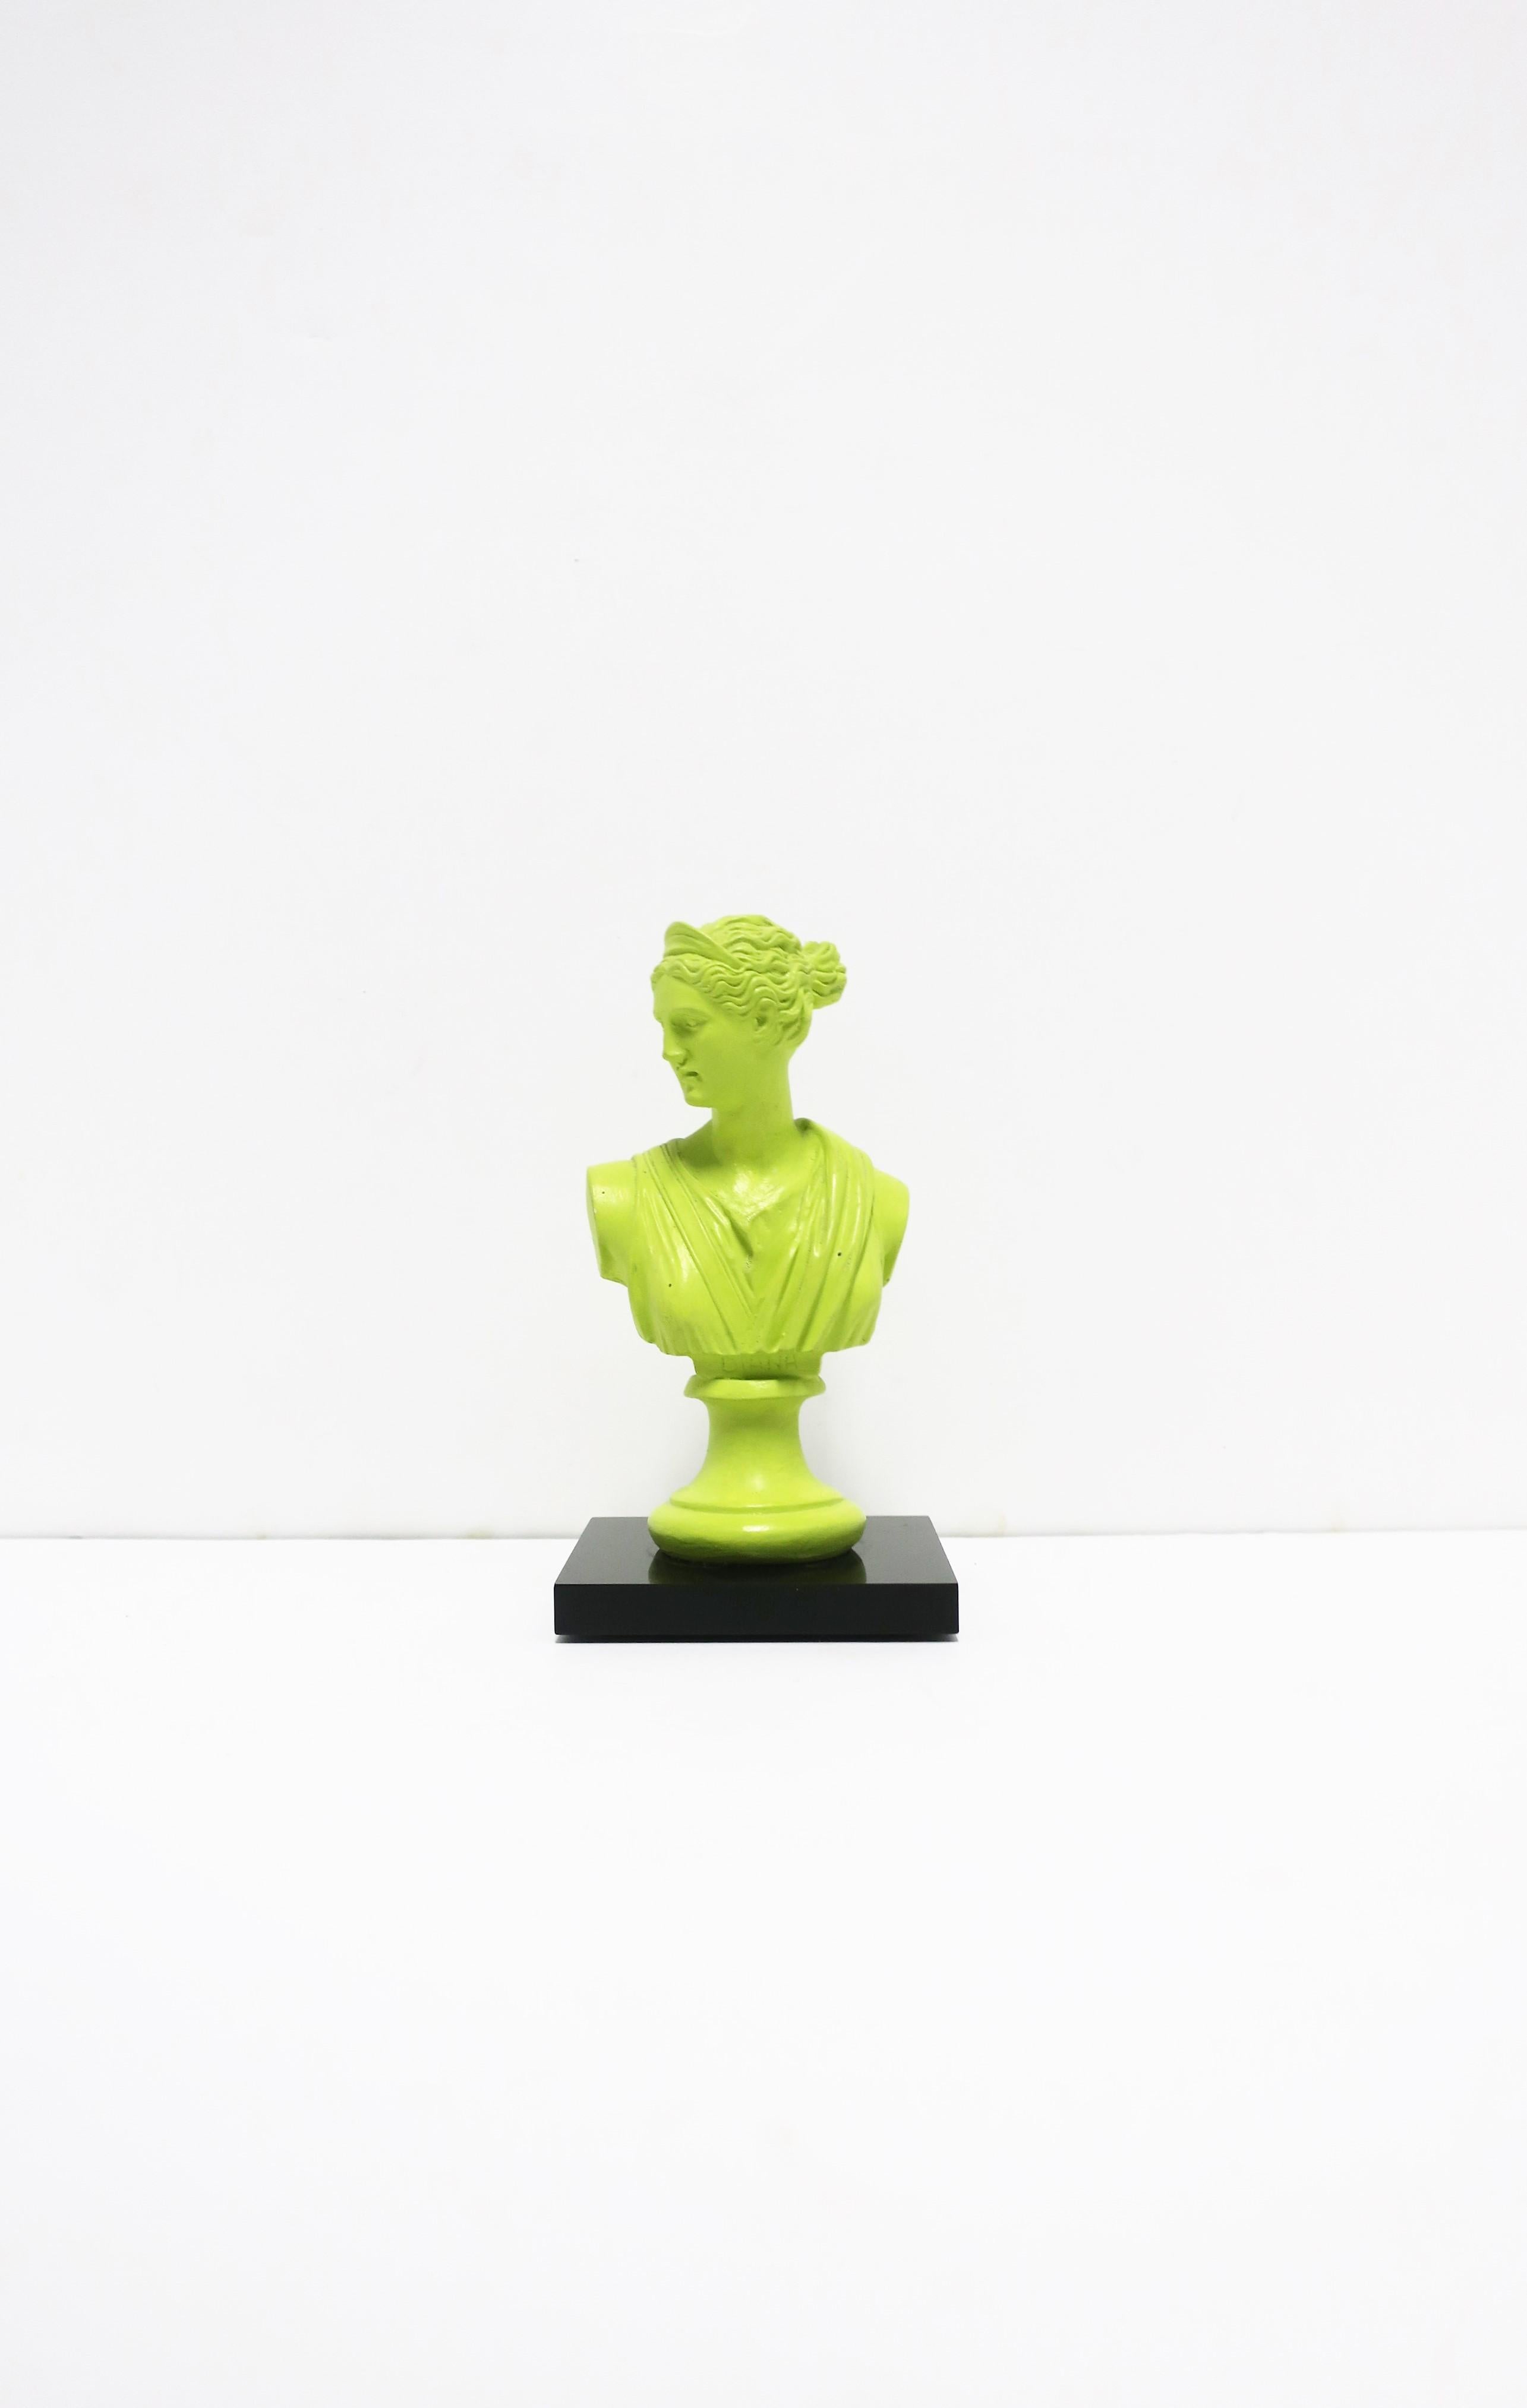 A neoclassical female bust statue in neon green on a black glass base. This is a resin or composite bust statue adhered to a square black glass base. A great pop of color for a bookshelf, office, desk, etc. Dimensions: 3.5